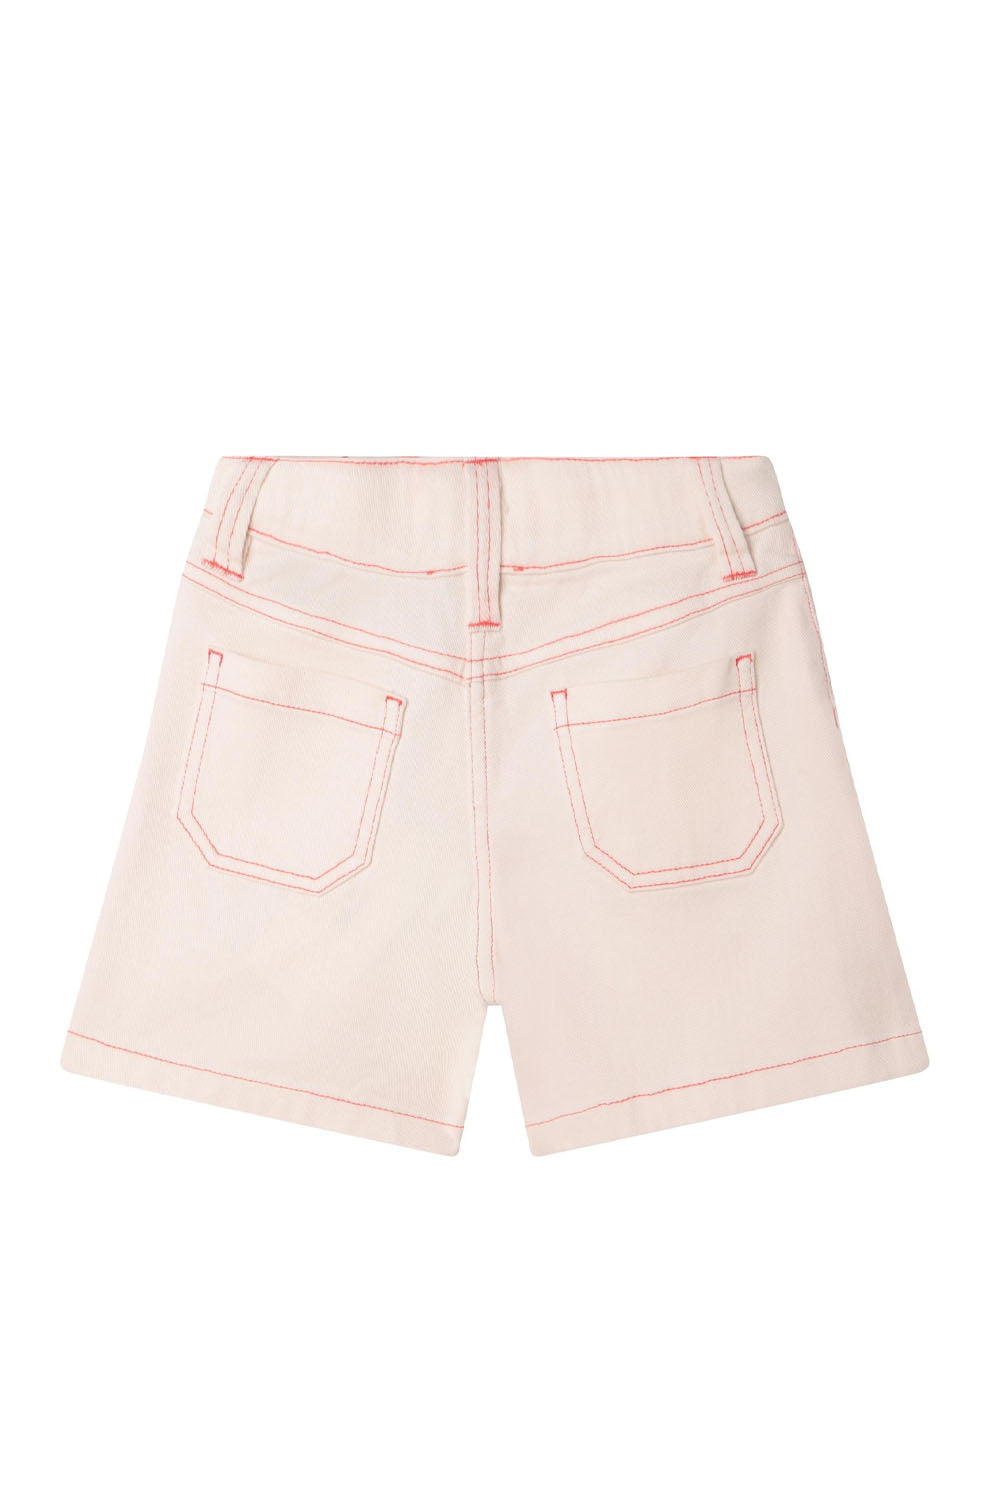 Con Double Stitching Tencel Twill Shorts for Girls Con Double Stitching Tencel Twill Shorts for Girls Maison7